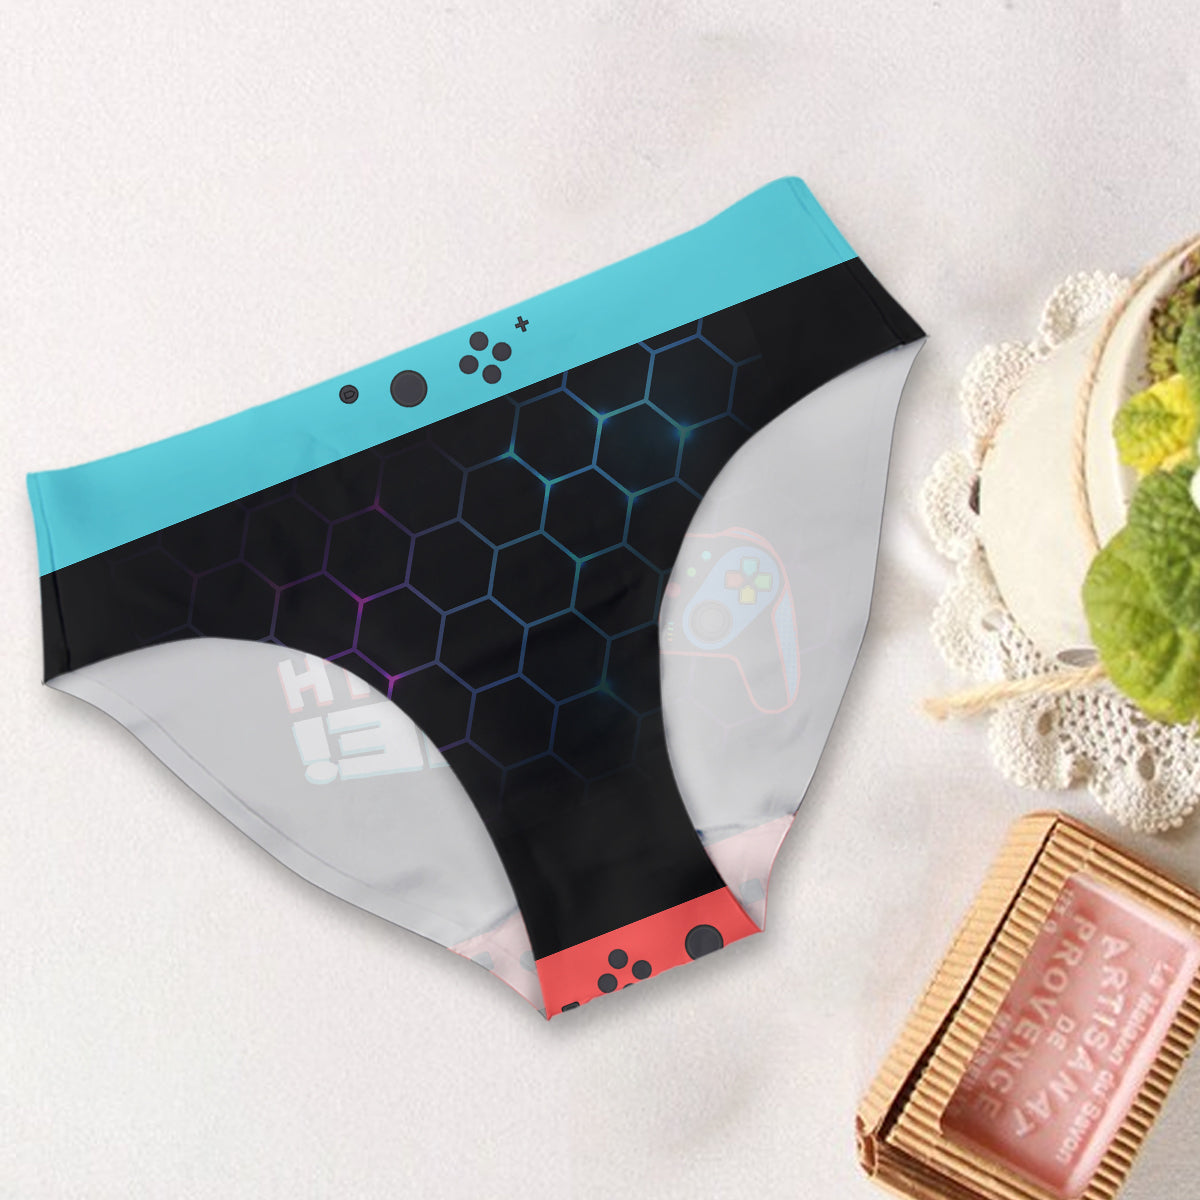 Play With Me Video Game Women Briefs